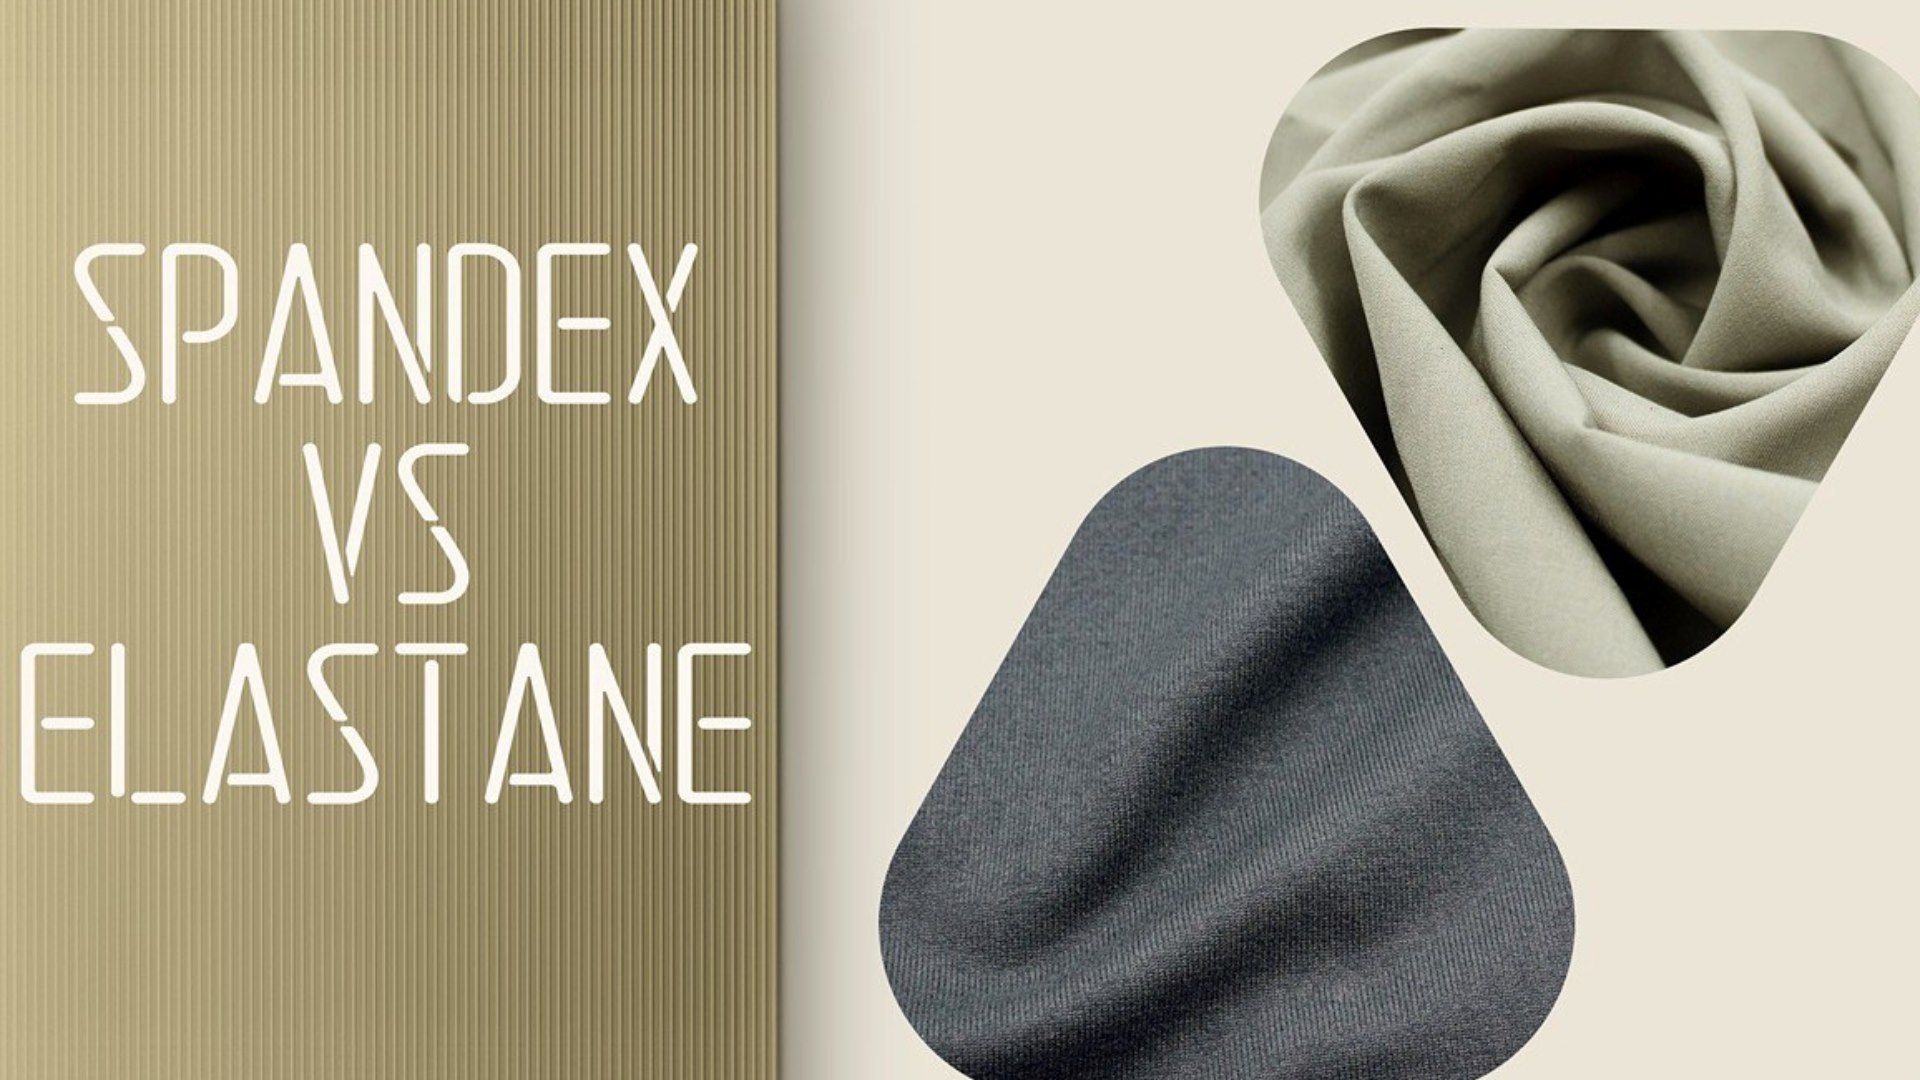 The Ultimate Showdown: Elastane Vs. Spandex – What’s The Real Difference?